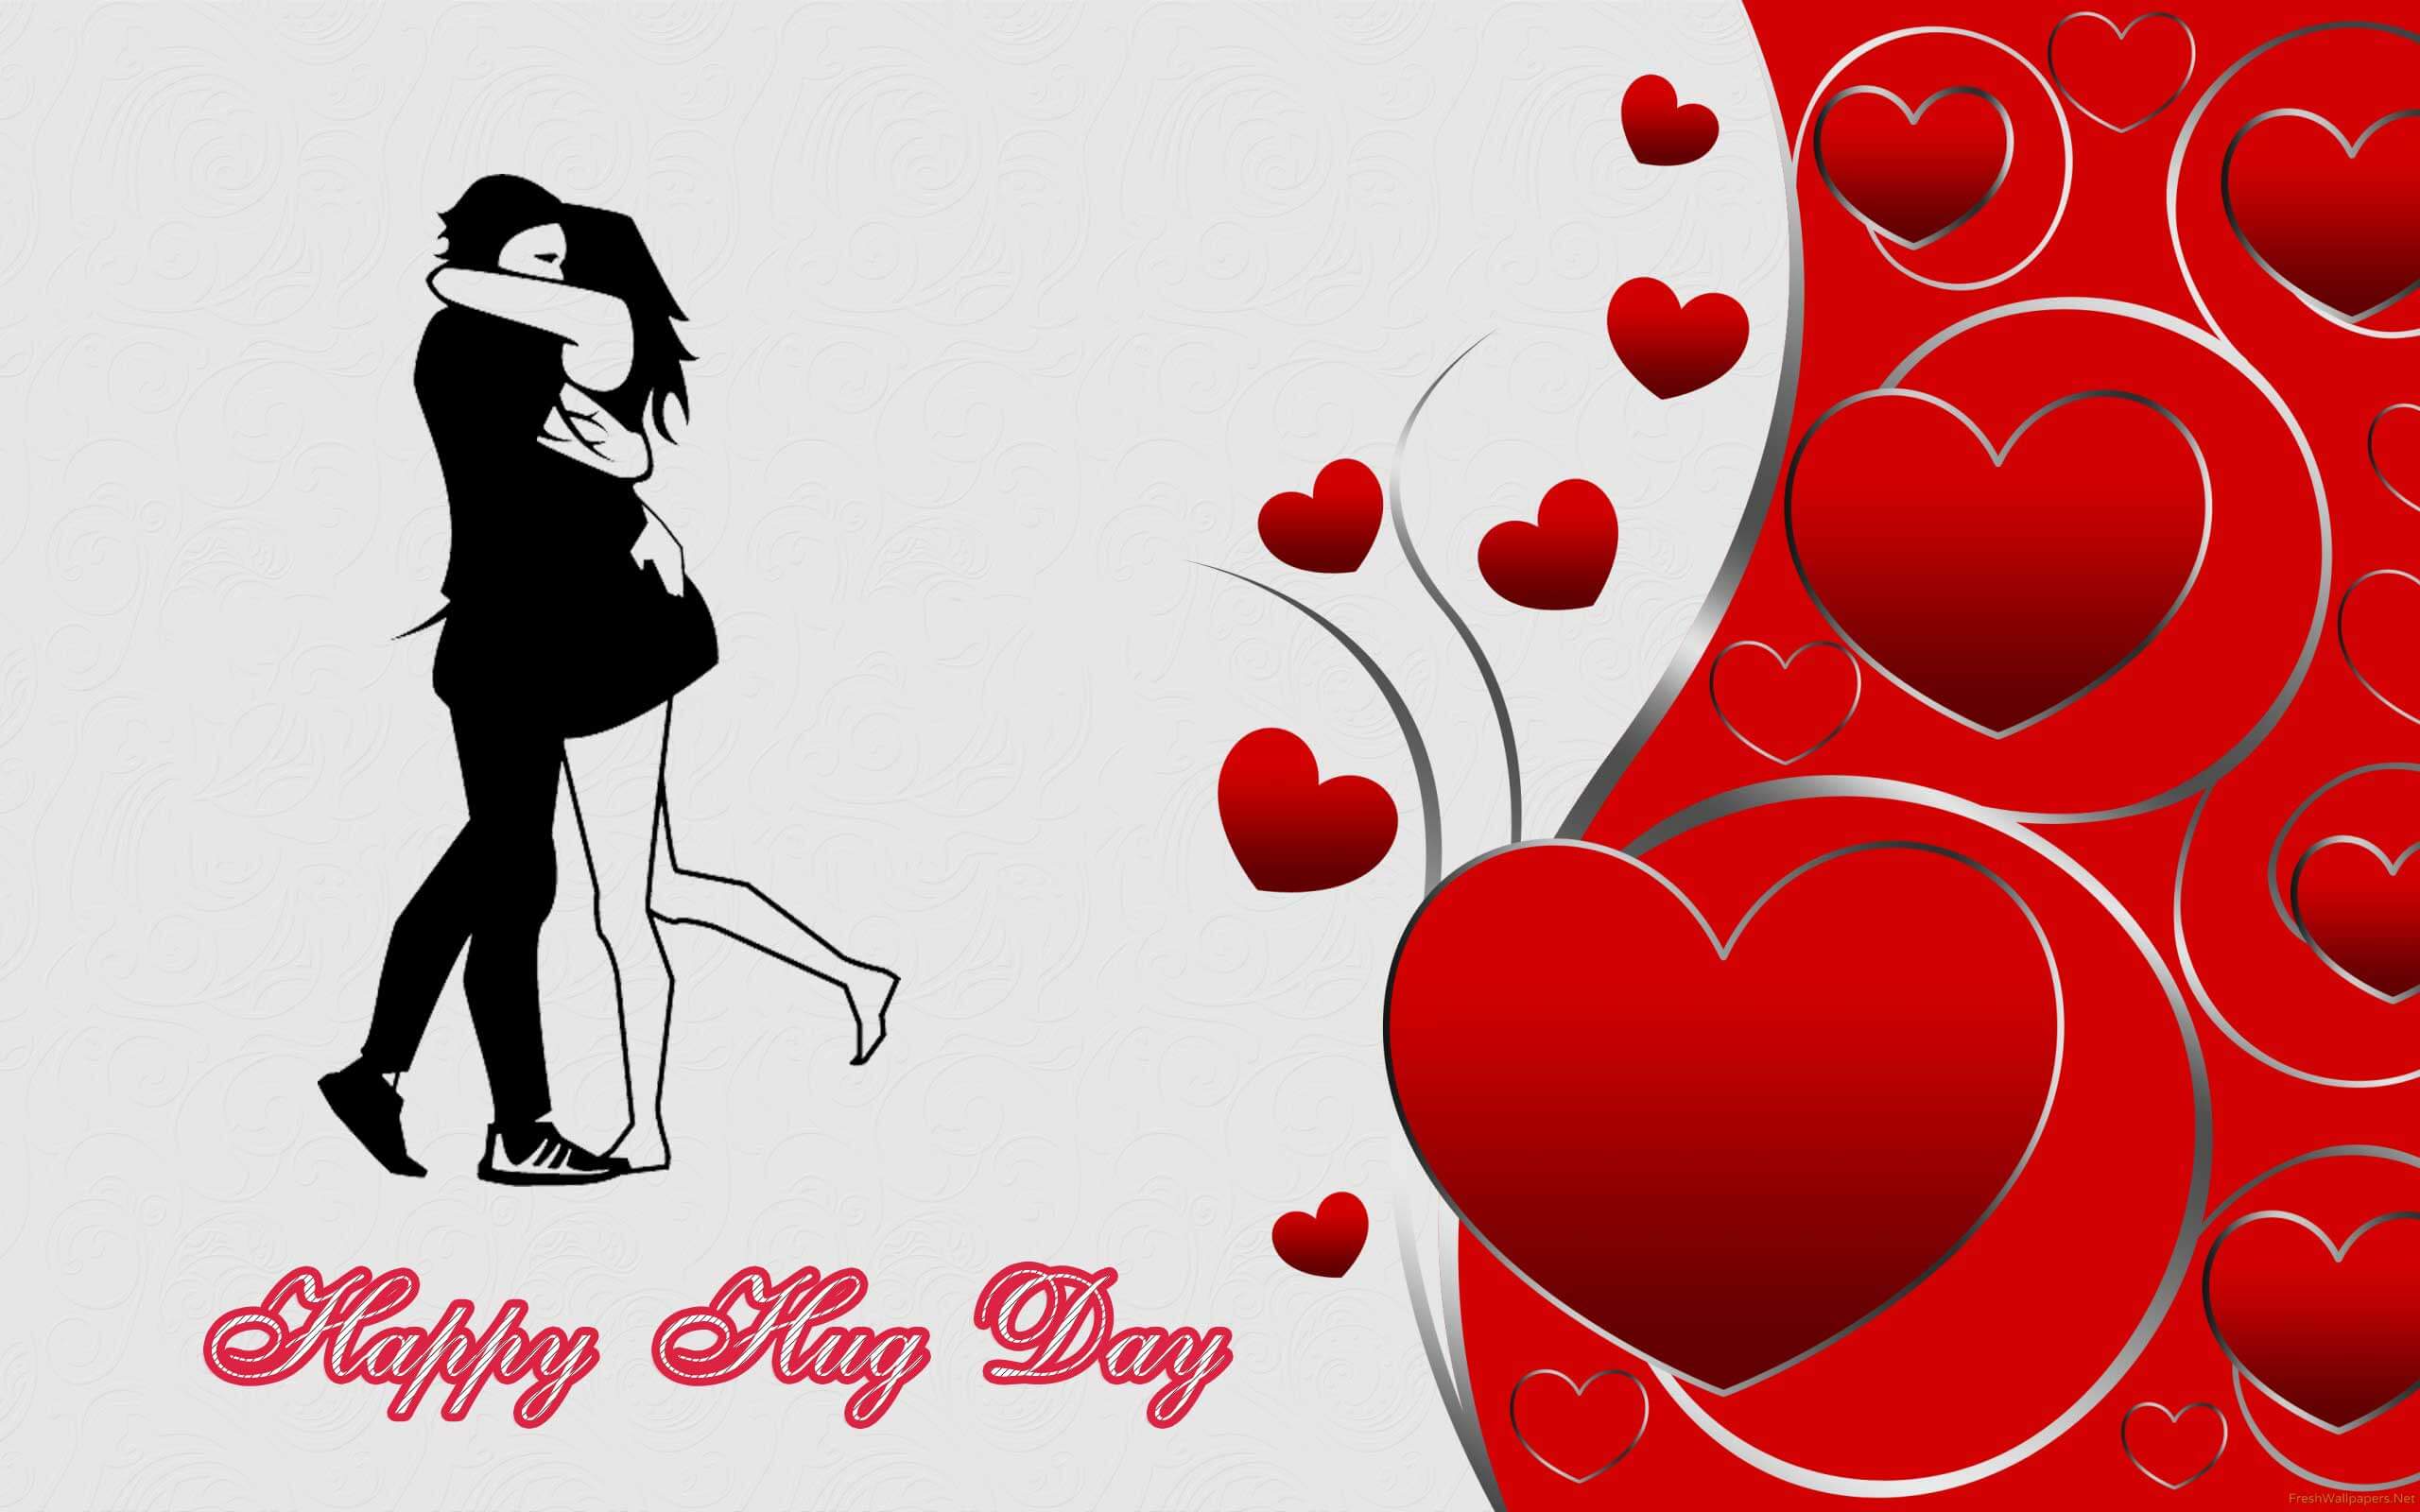 Happy Hug Day Wishes Love Romantic Couples Hearts Background Happy Valentines Day HD Wallpaper